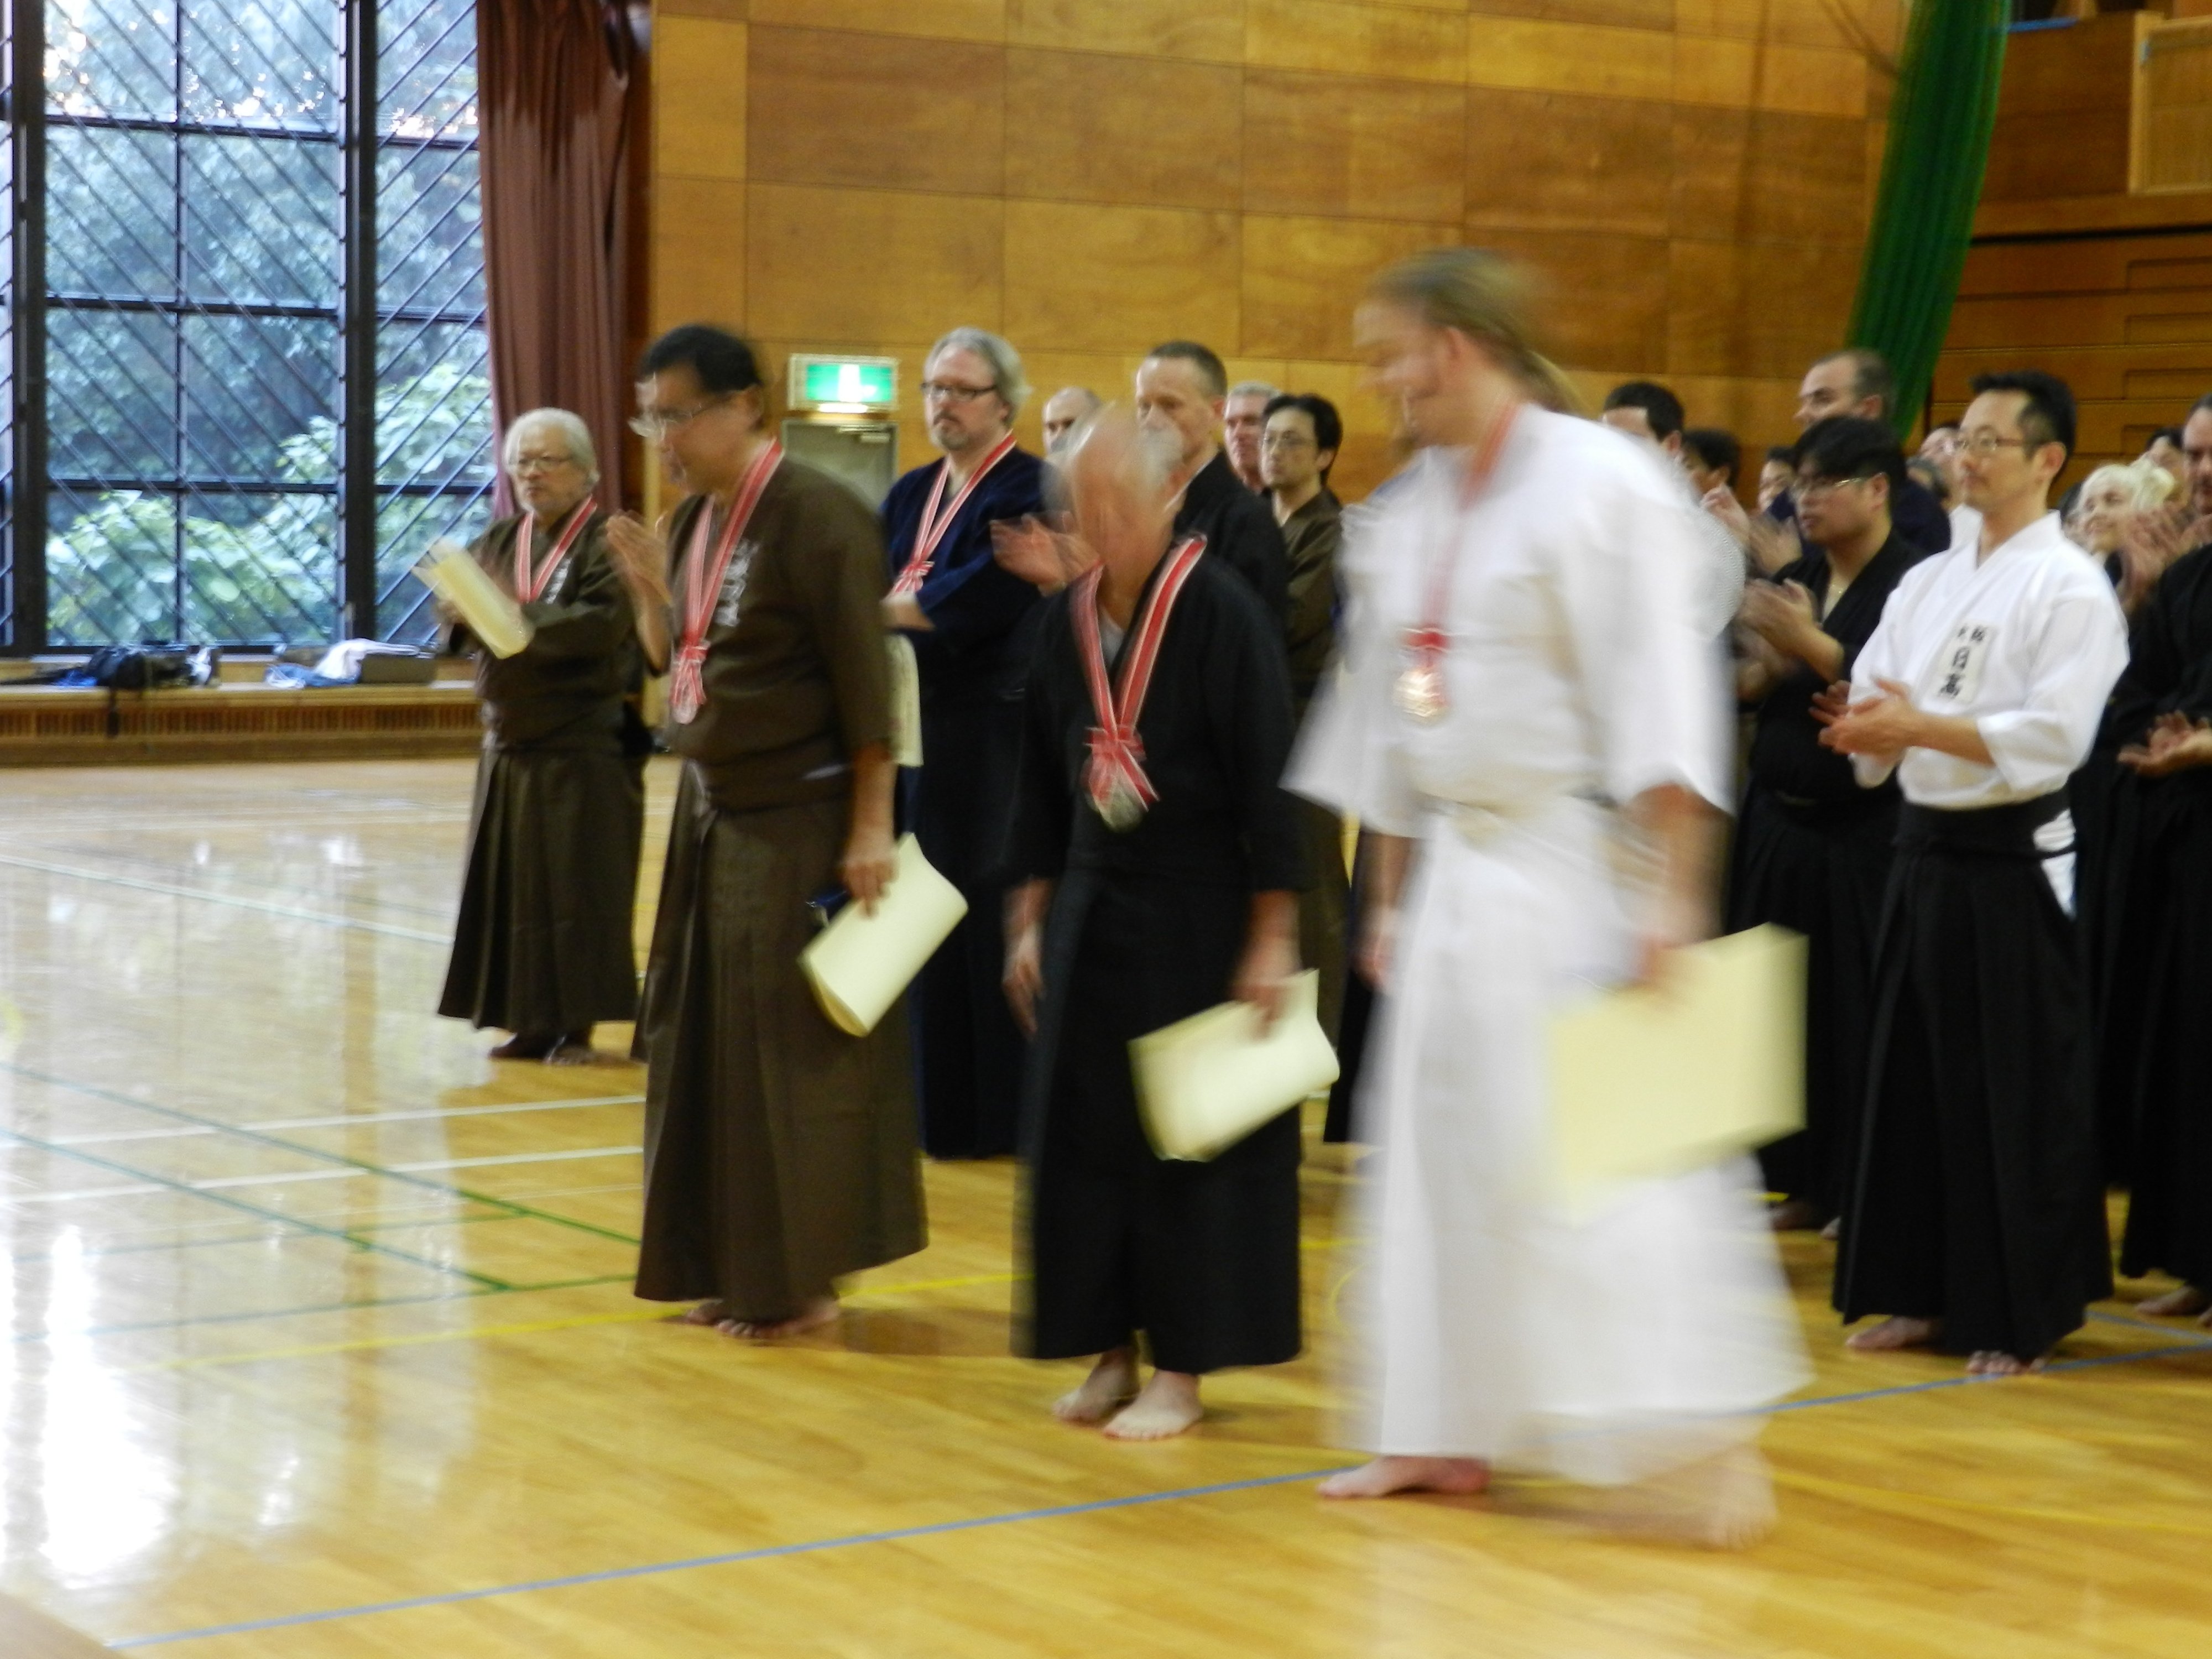 Award ceremony - Tex in the background with a 3rd place in Nidan and below kata.